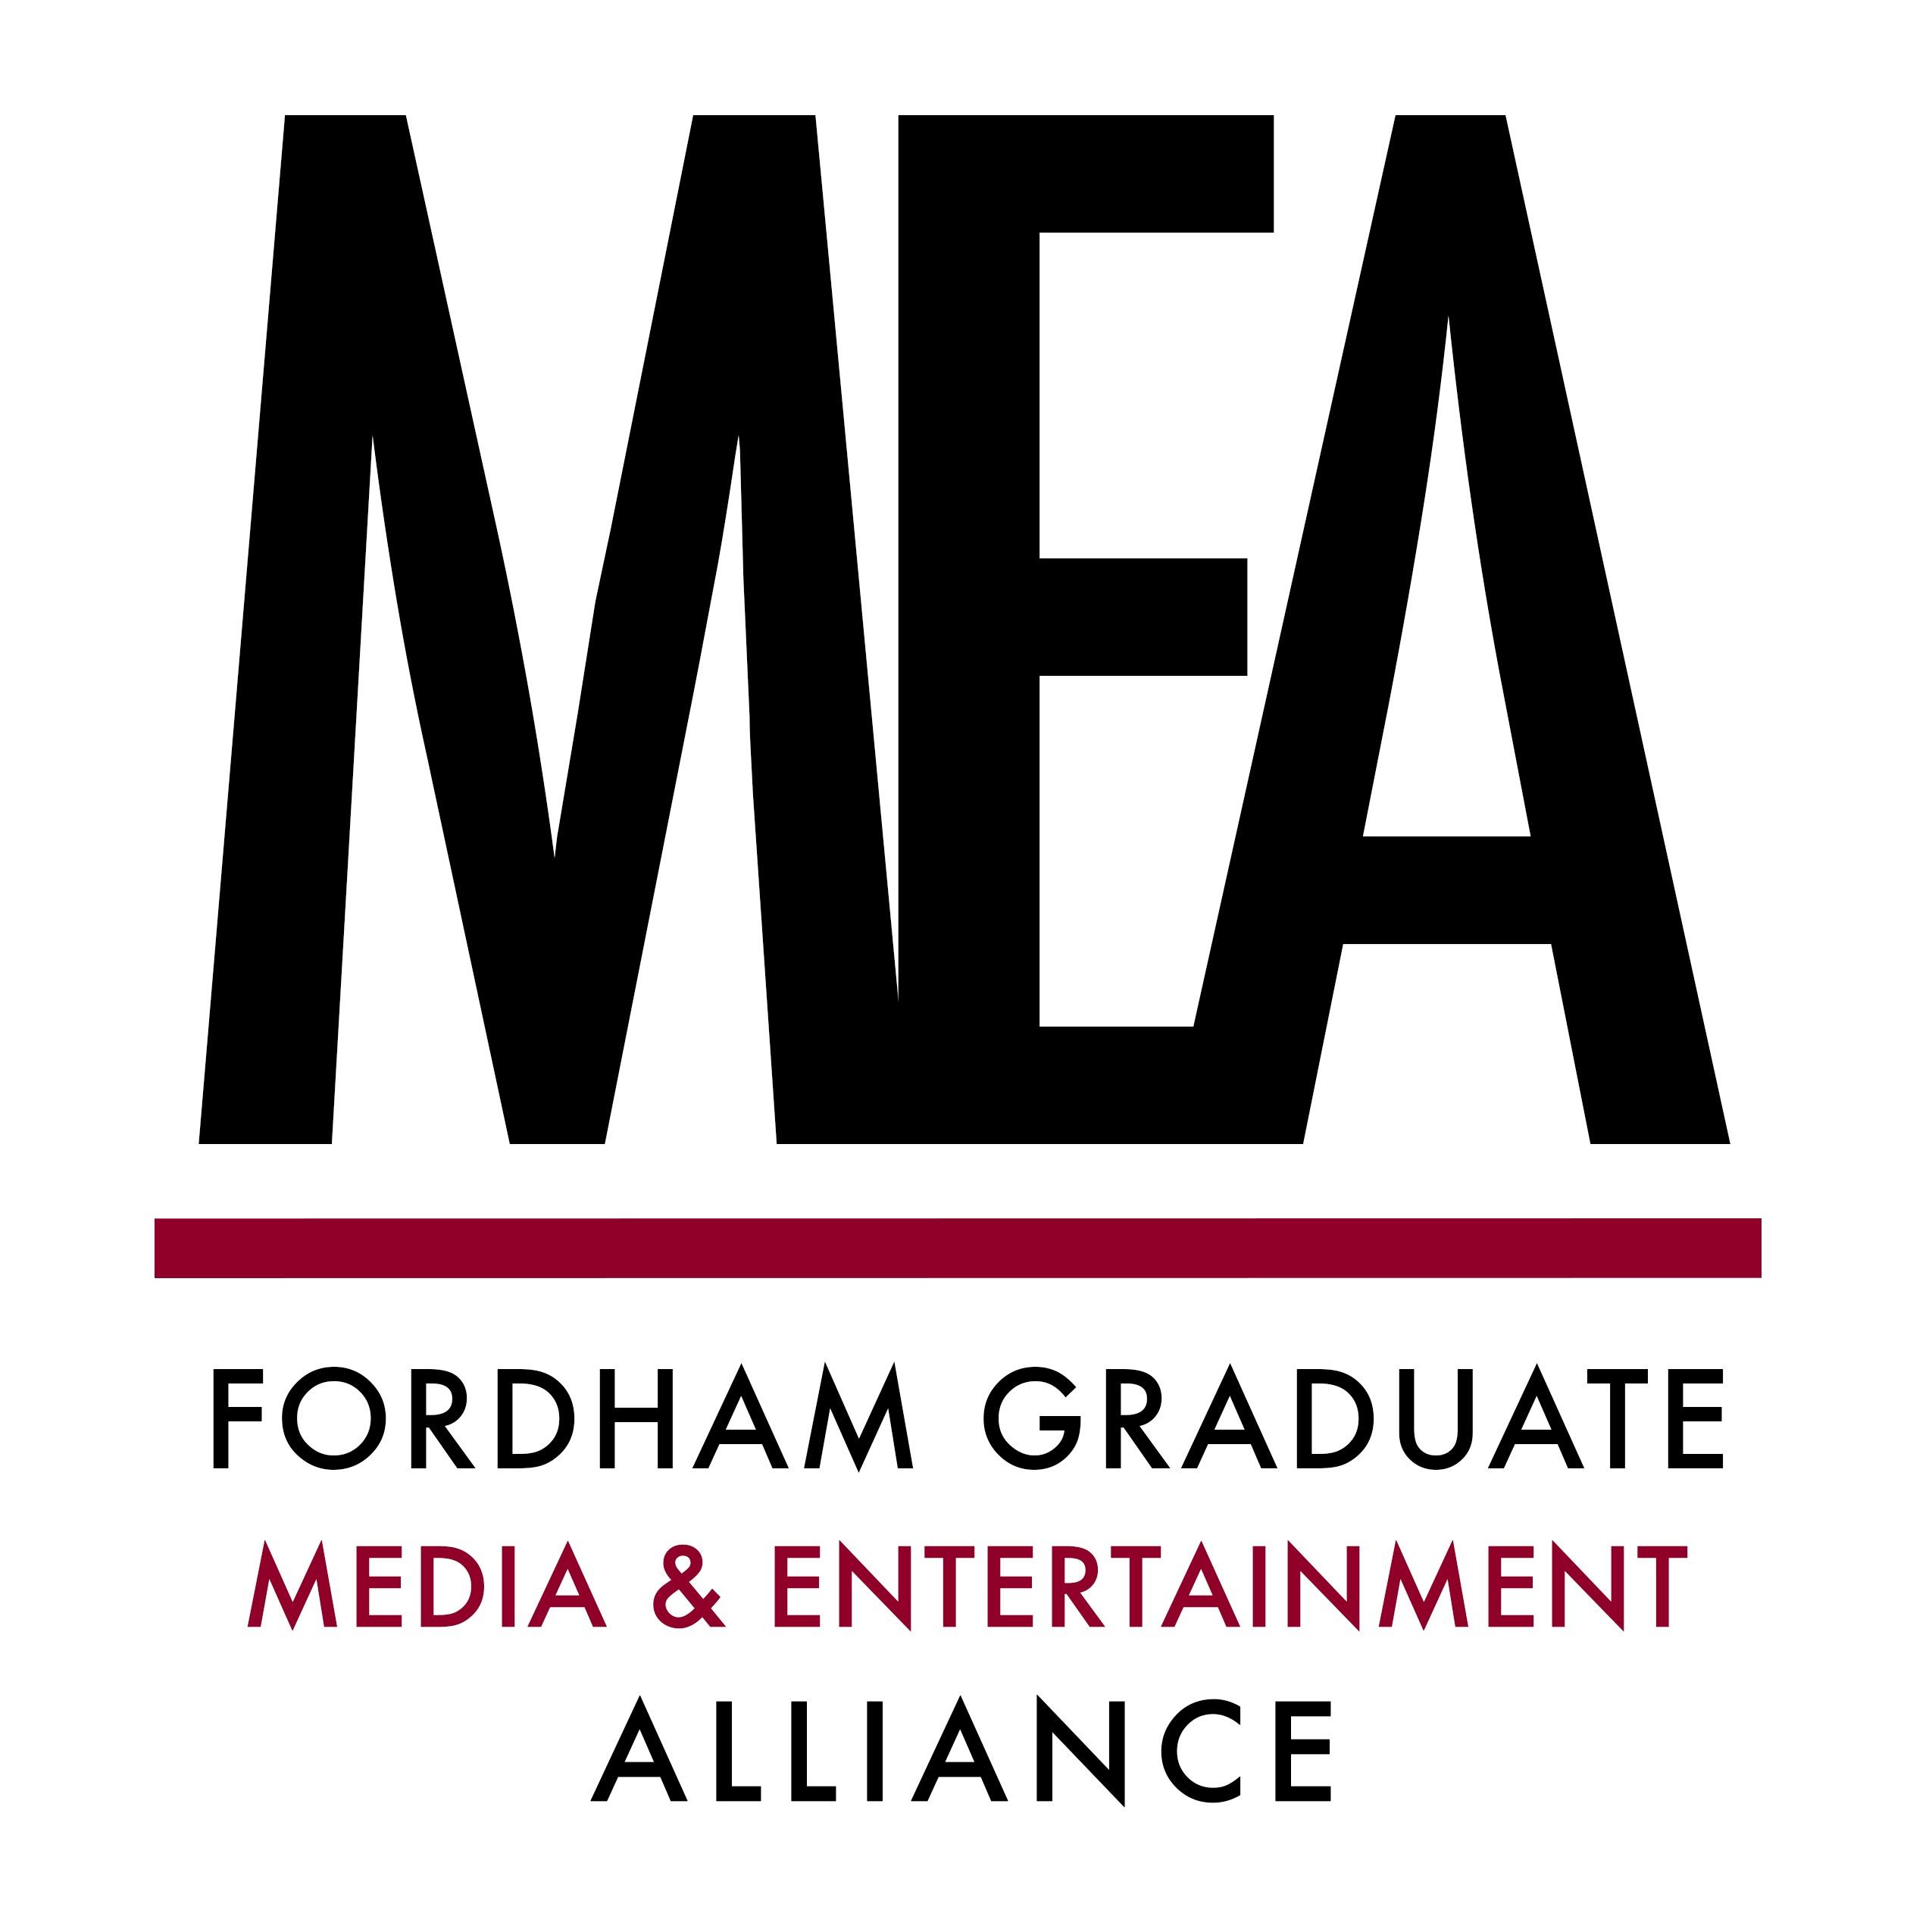 Fordham University's Media & Entertainment Alliance, connecting the classroom to the industry.

https://t.co/Img9201q8Q